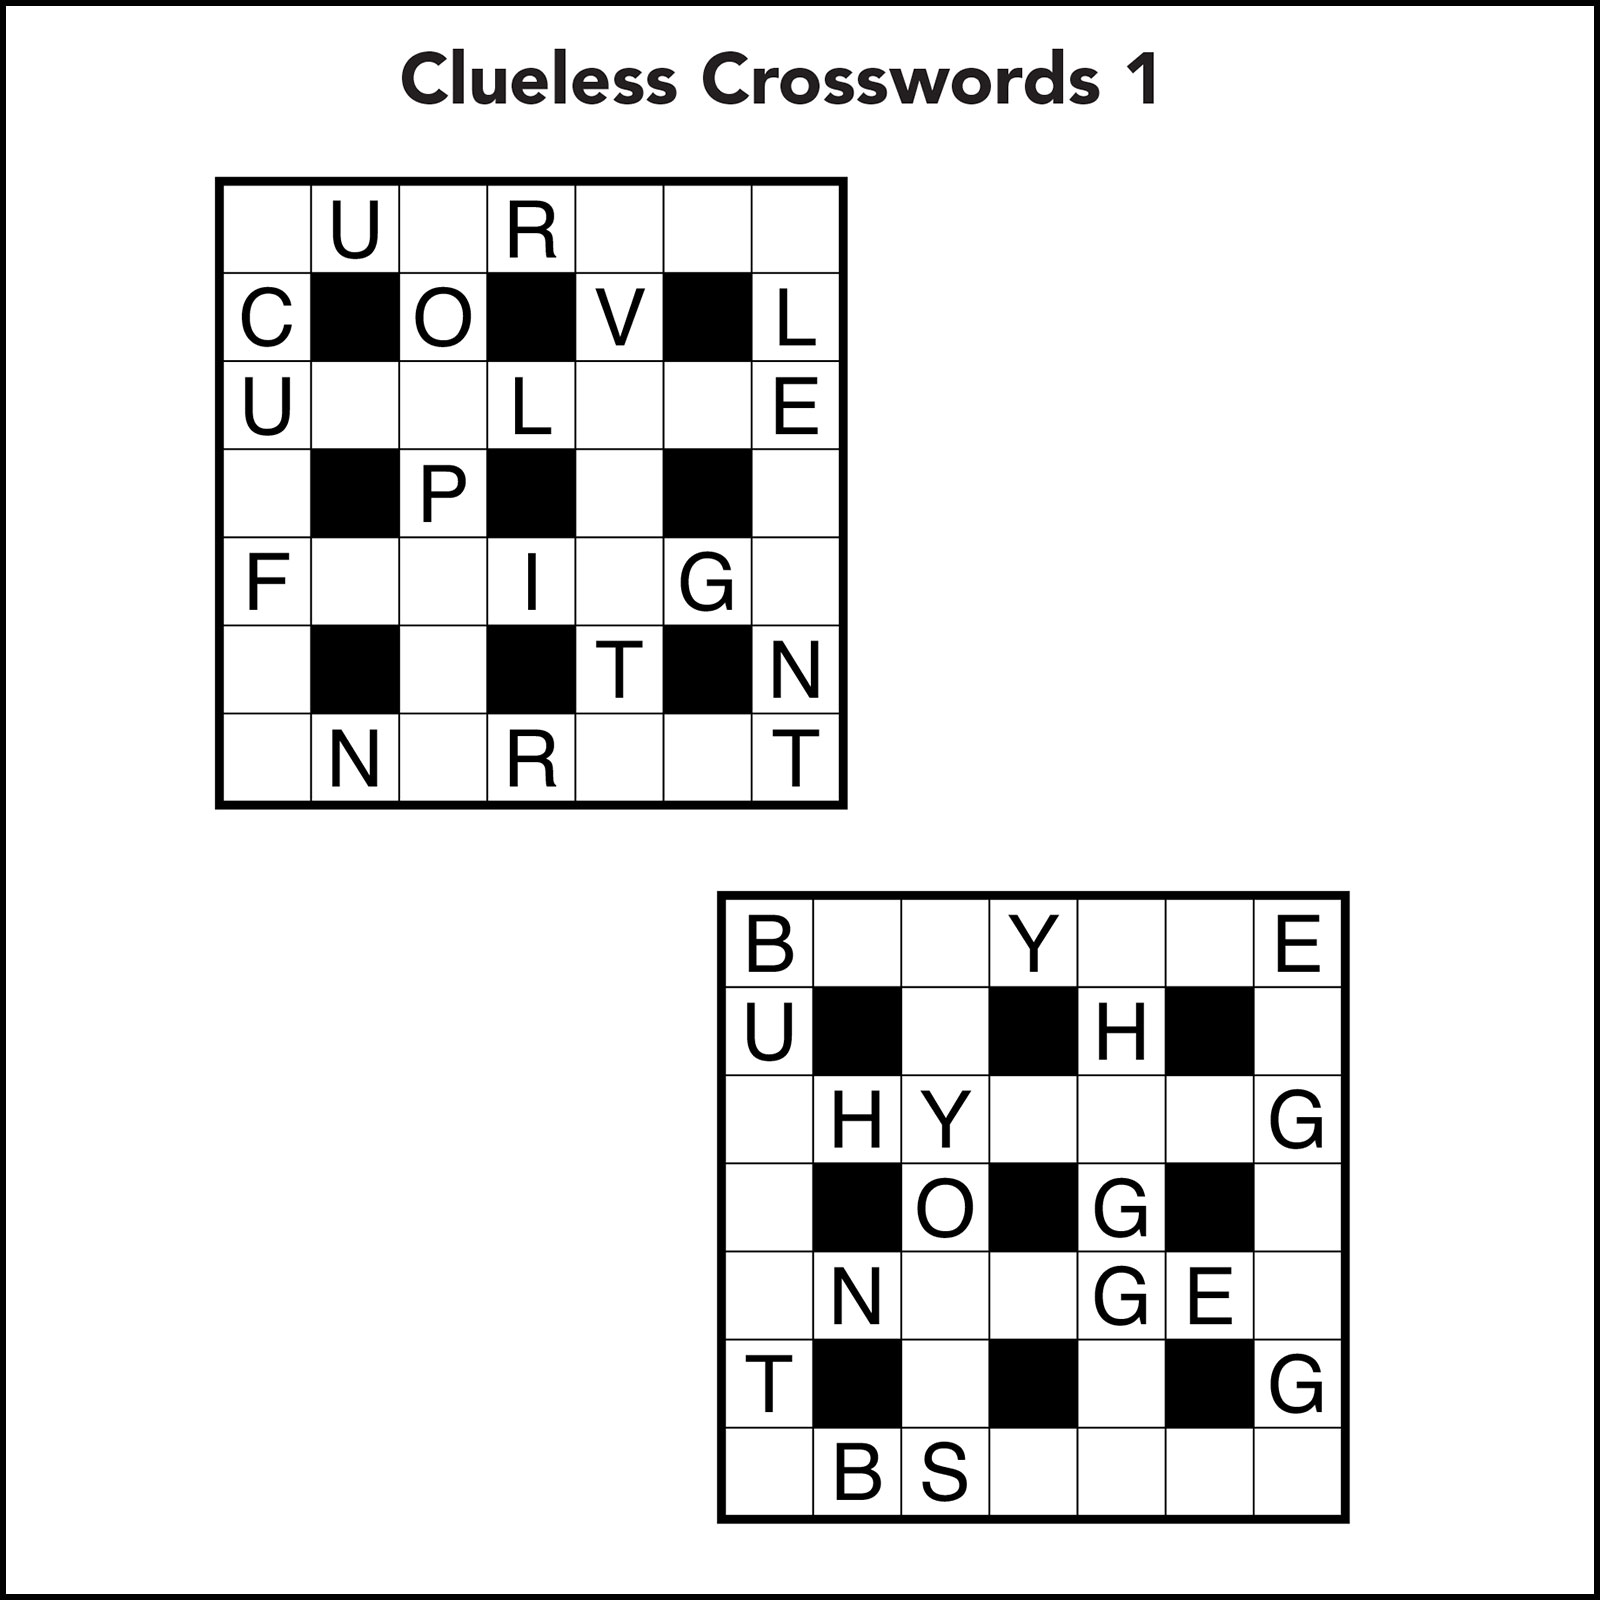 two samples of "clueless crosswords"